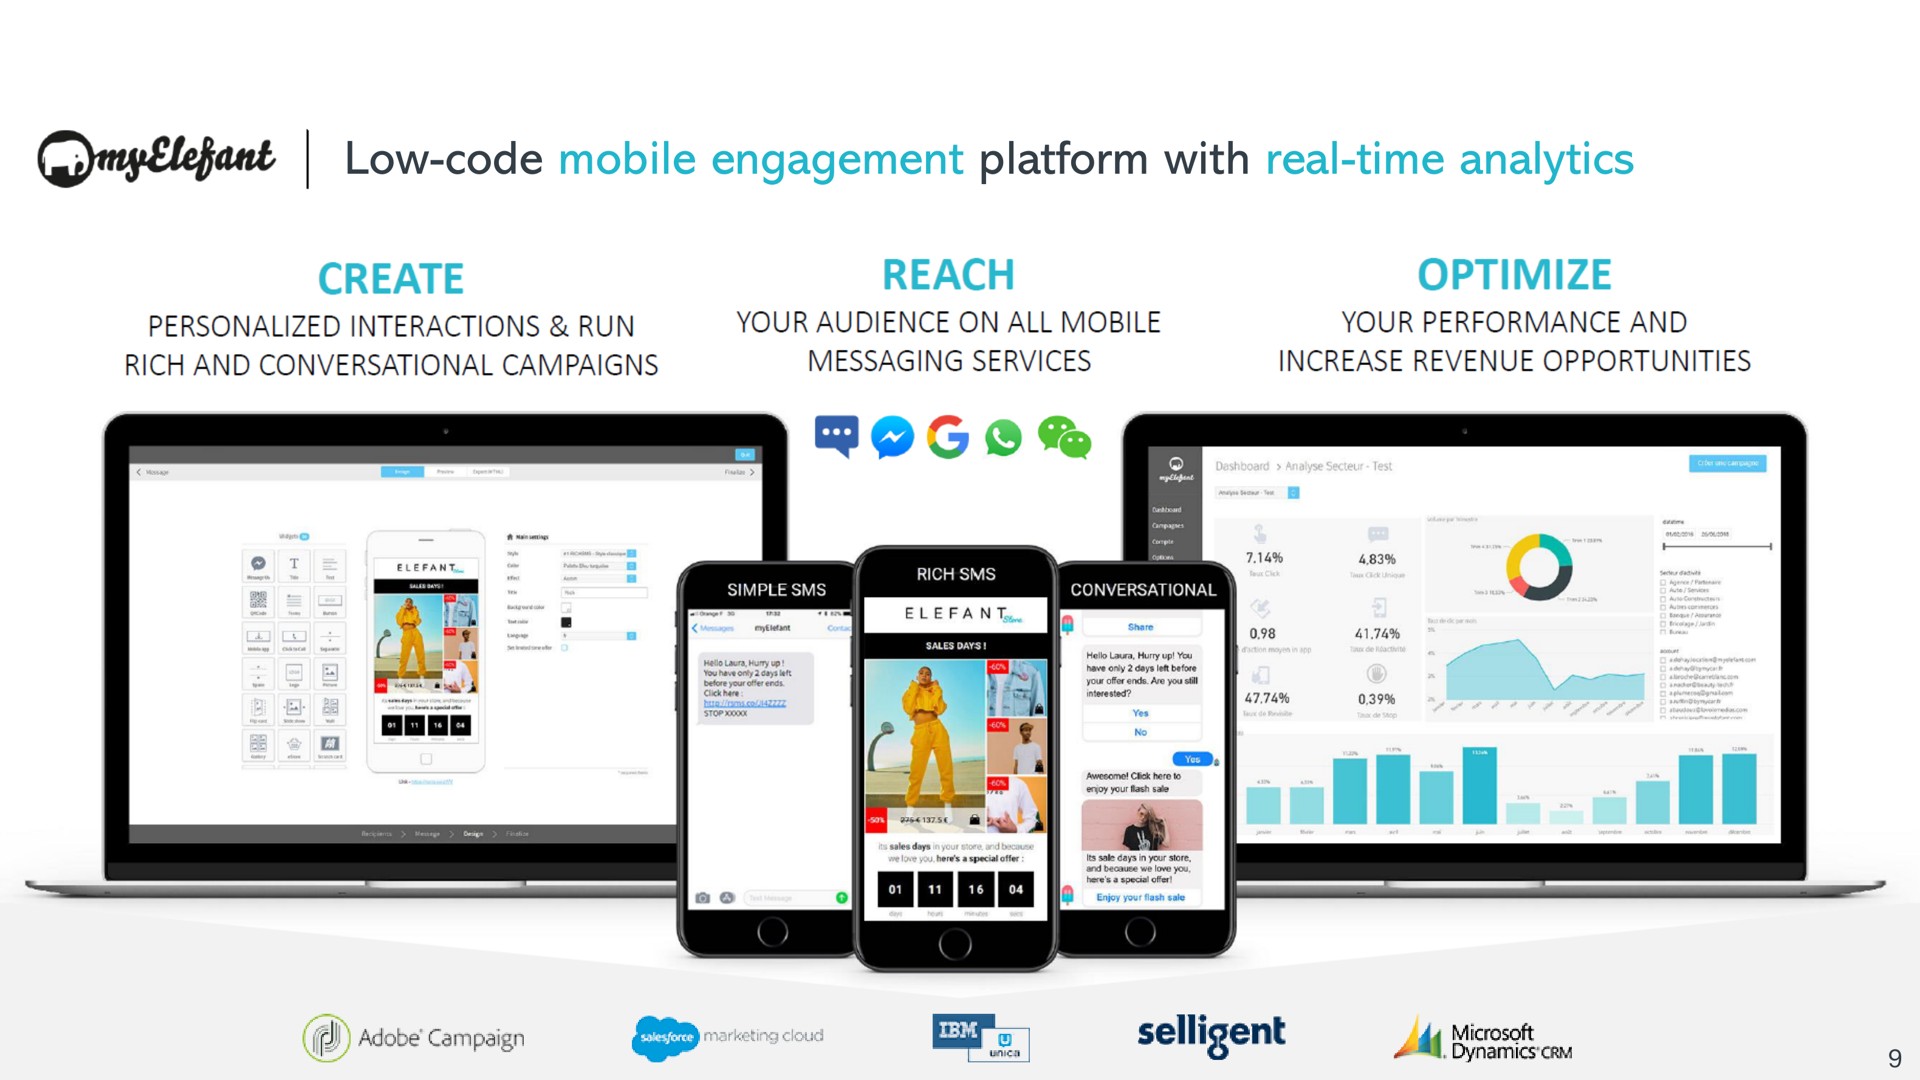 low code mobile engagement platform with real time analytics optimize your performance and reach your audience on all messaging services create personalized interactions run rich and conversational campaigns increase revenue opportunities adobe campaign | Sinch